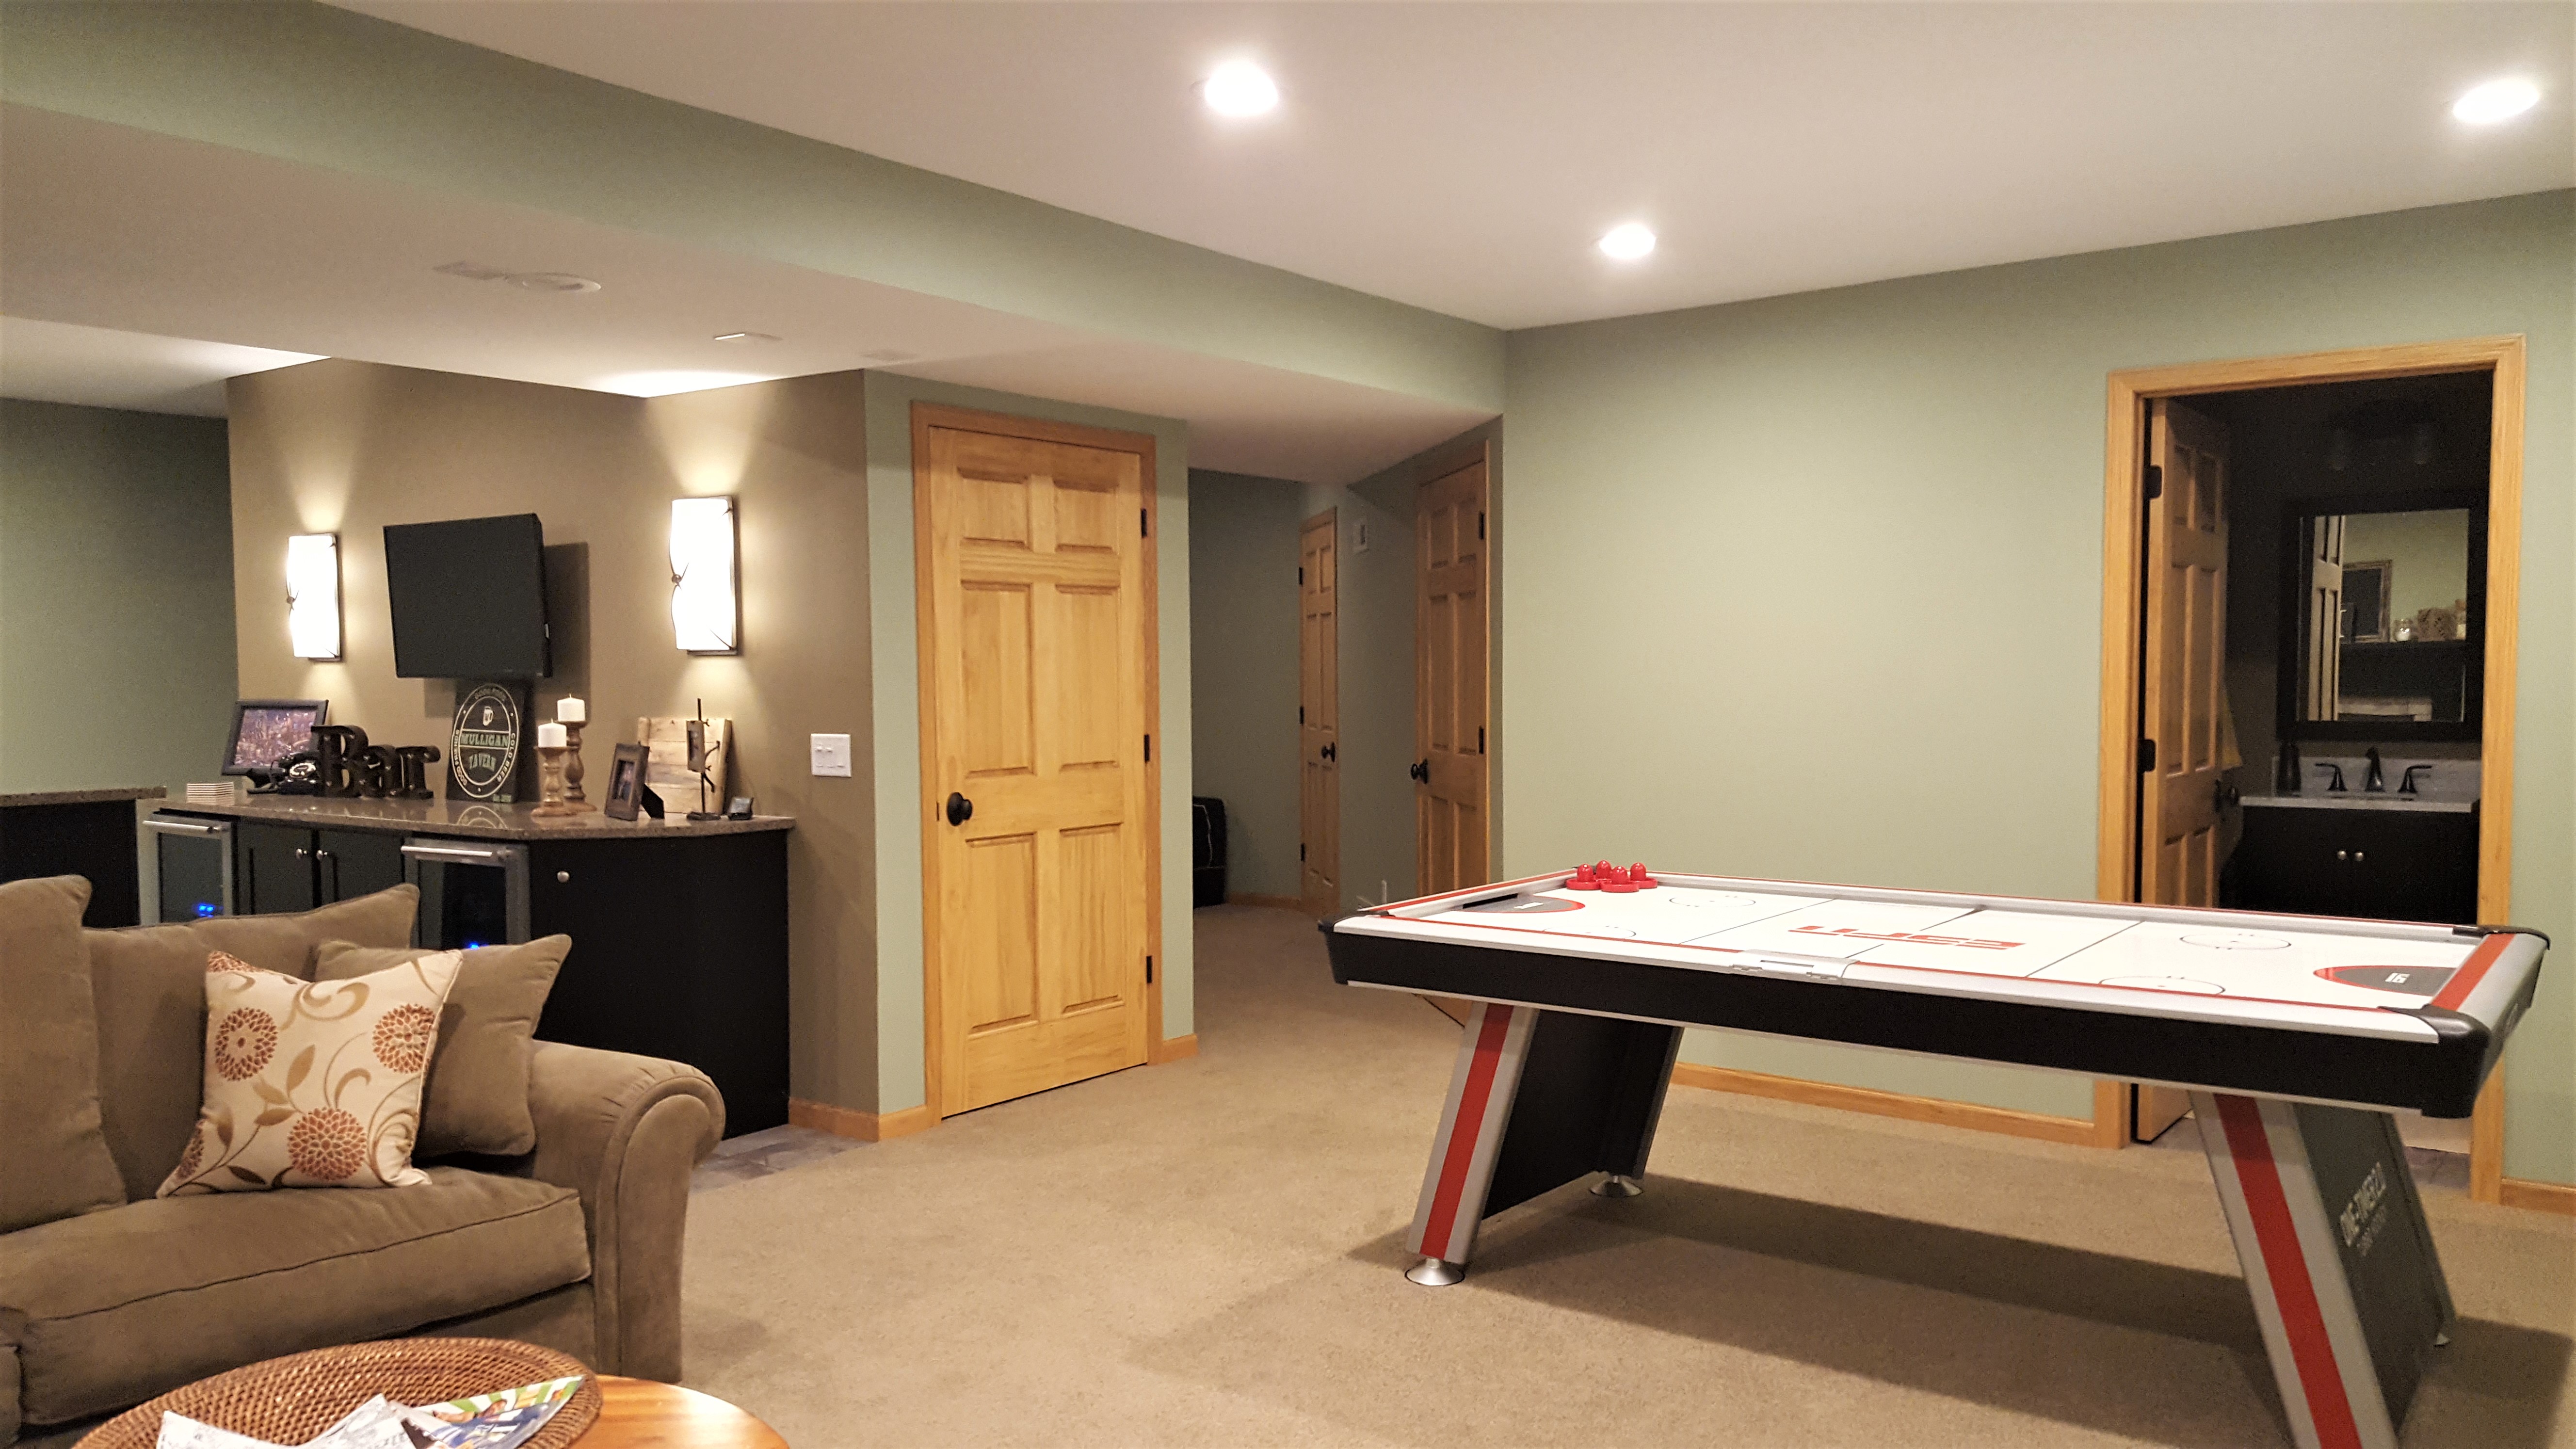 Finished Basement Creates Family Fun Space – Time 2 Remodel, LLC.